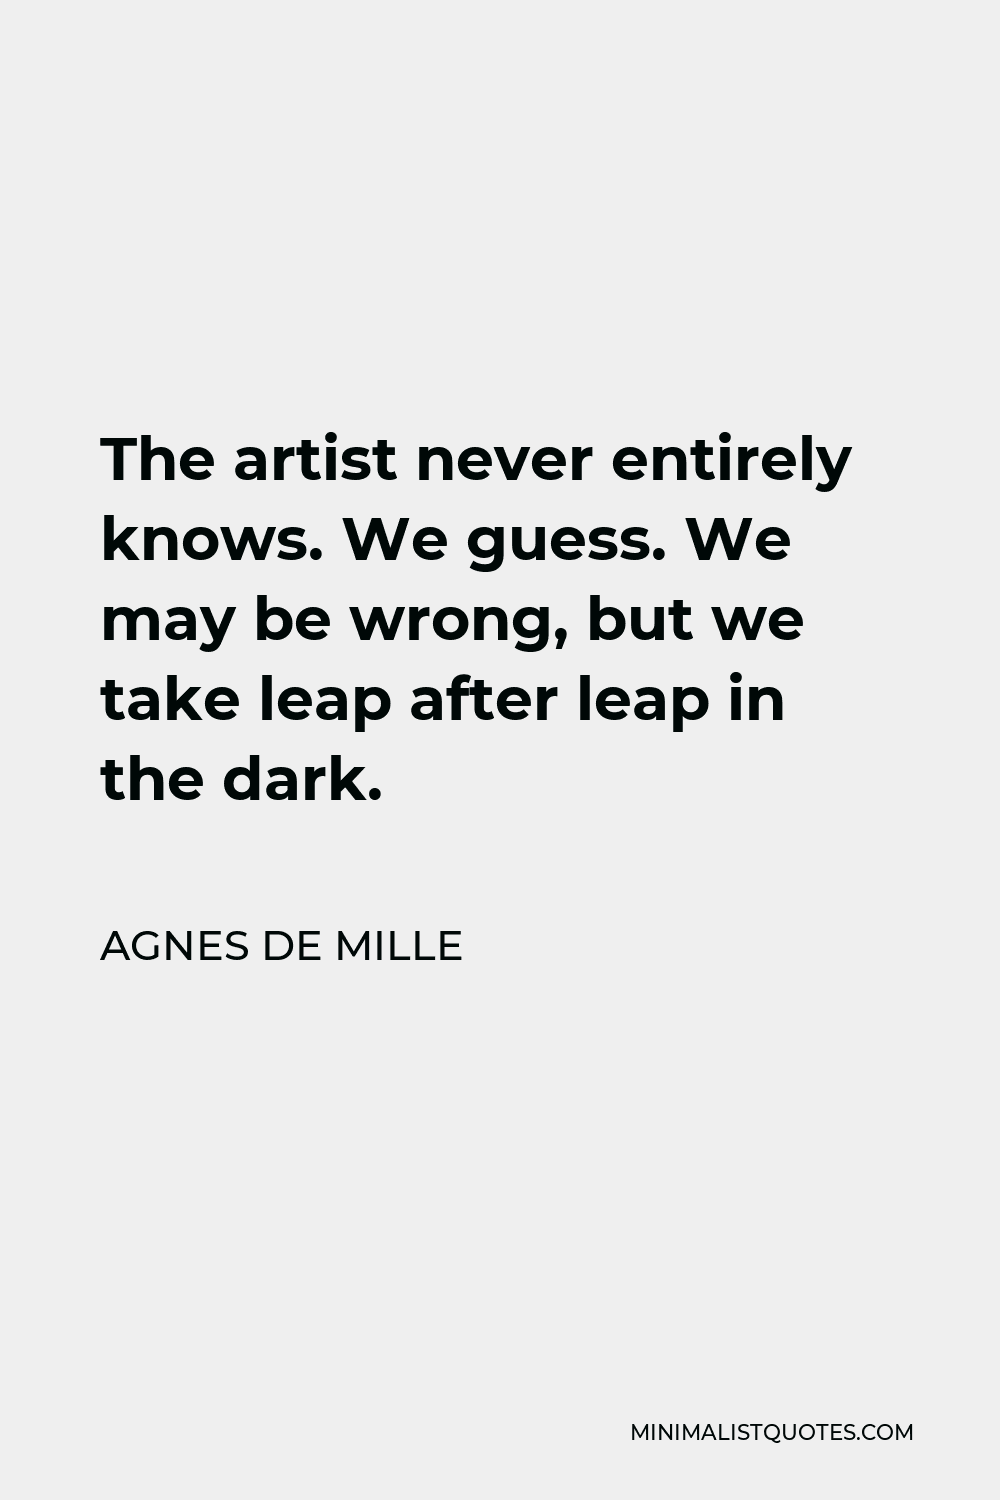 Agnes de Mille Quote - The artist never entirely knows. We guess. We may be wrong, but we take leap after leap in the dark.